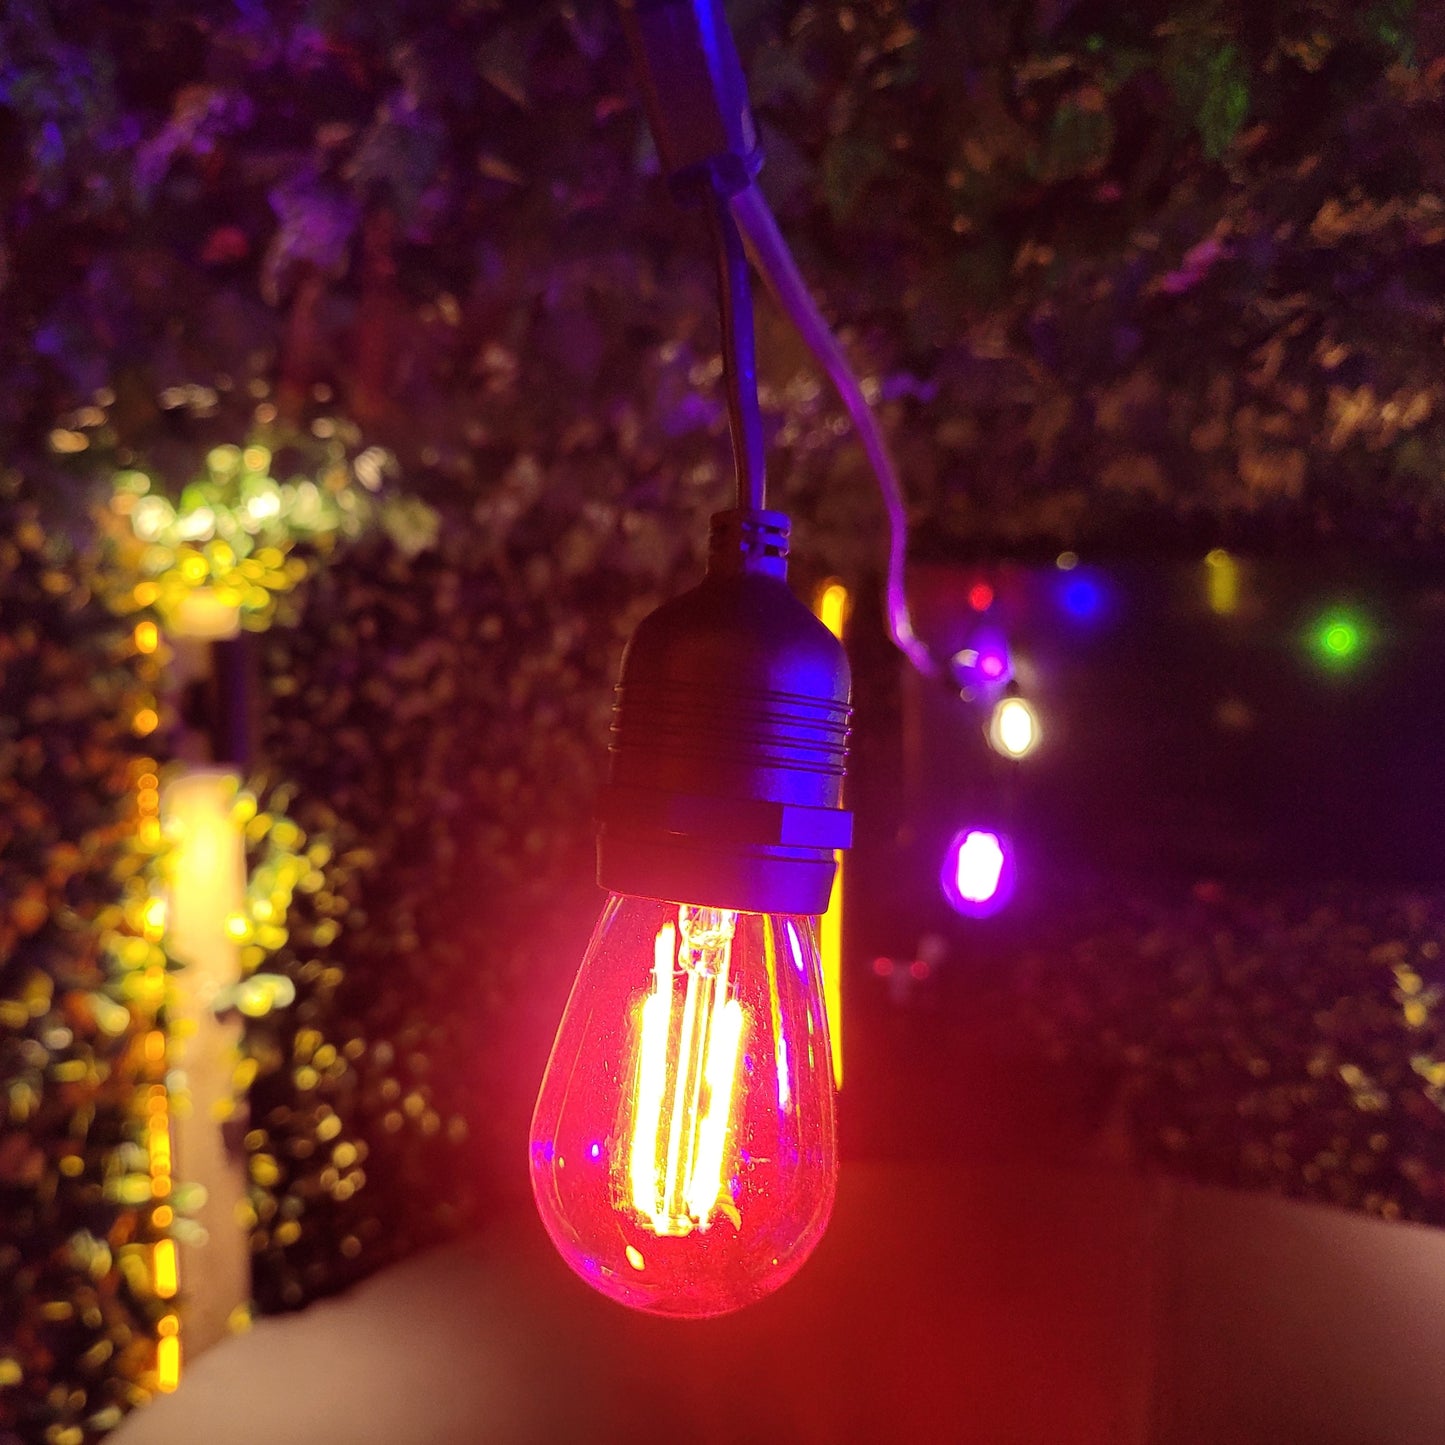 30M / 98FT Multi-Colour LED Plug-in Waterproof Heavy Duty Outdoor String Lights